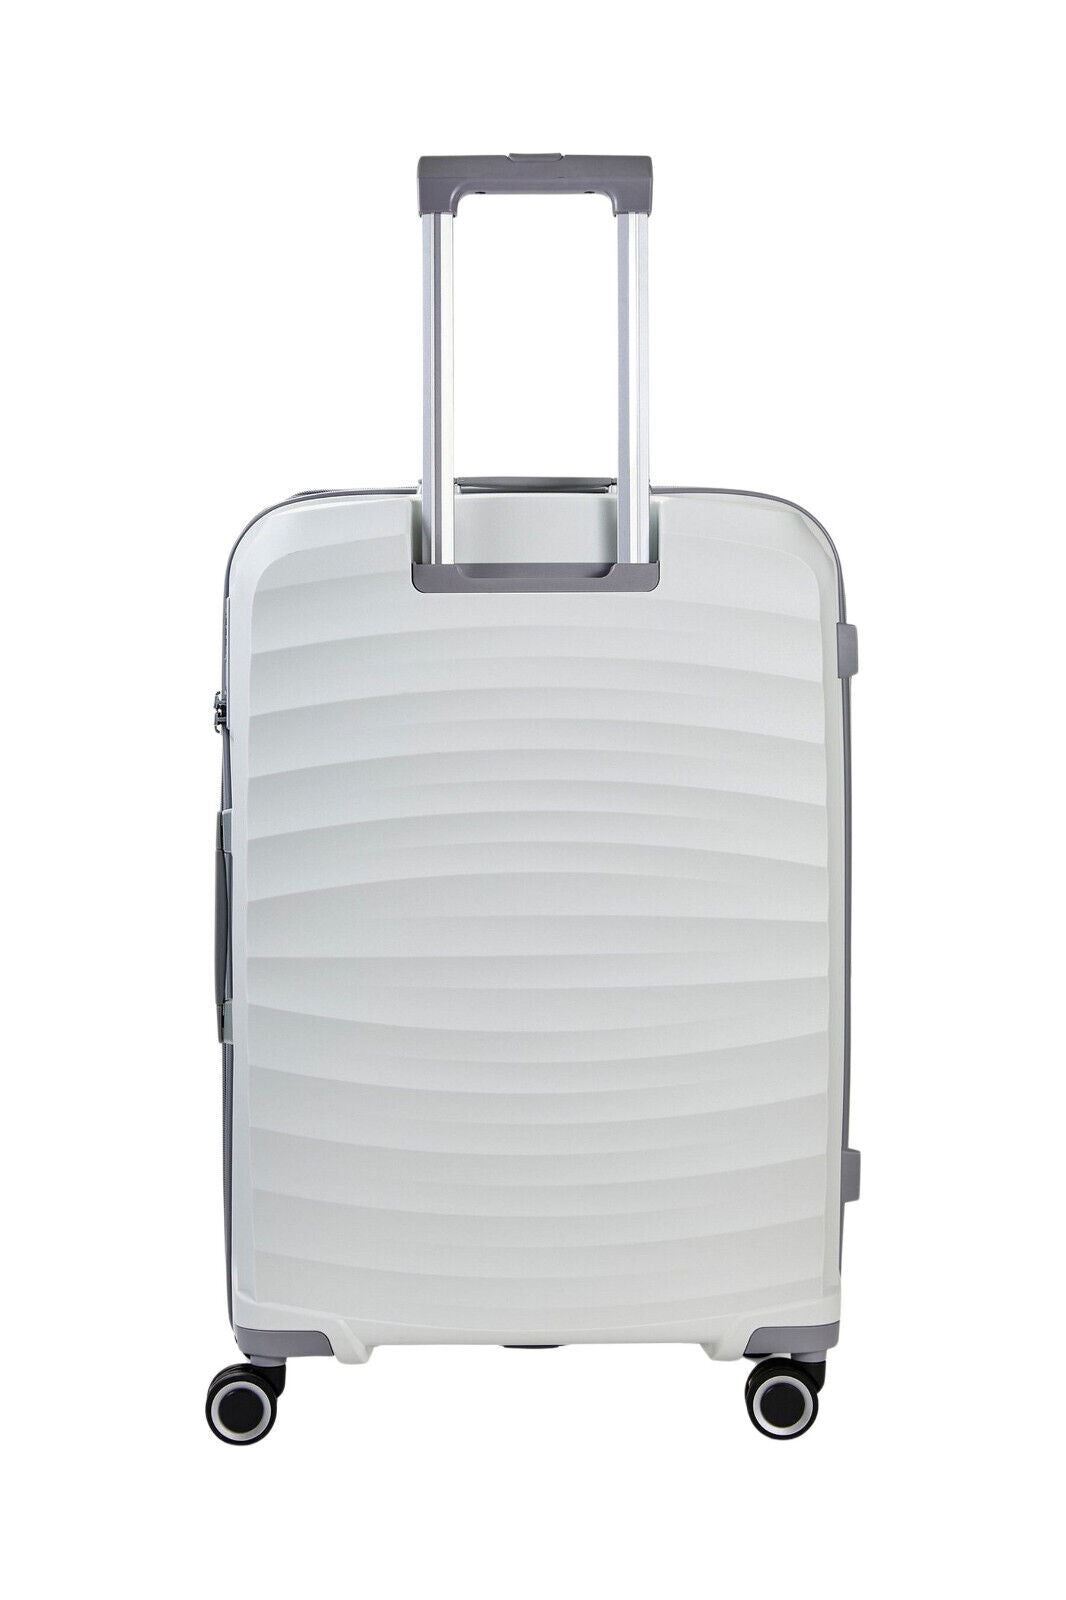 Hard Shell Classic White Suitcase Set 8 Wheel Cabin Luggage Trolley Travel Bag